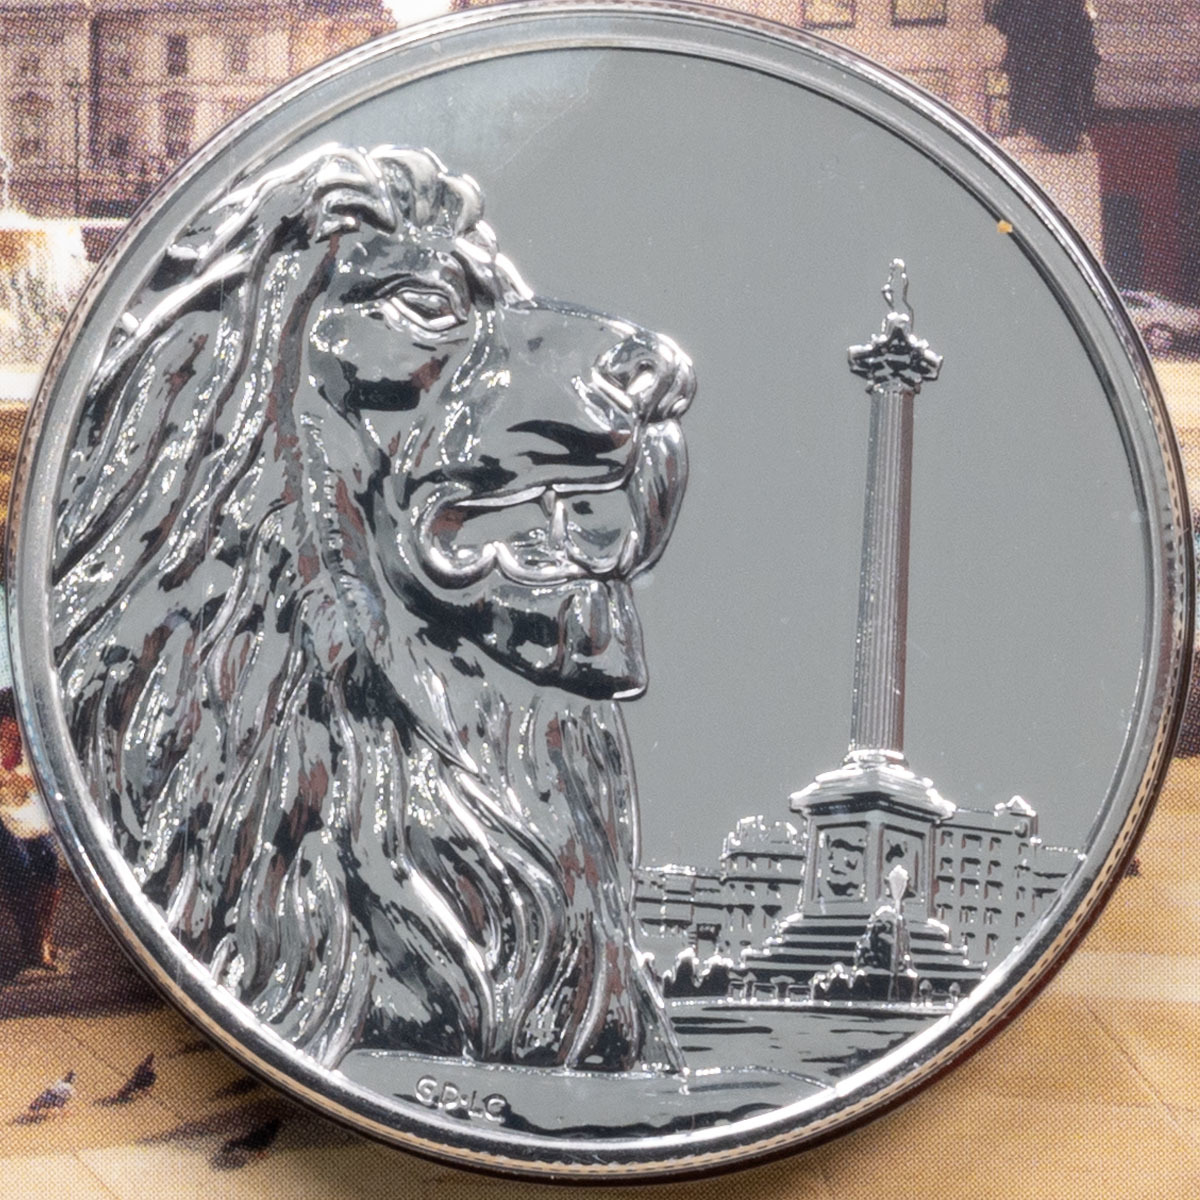 UK16100P 2016 Trafalgar Square One Hundred Pound Silver Brilliant Uncirculated Coin In Folder Reverse